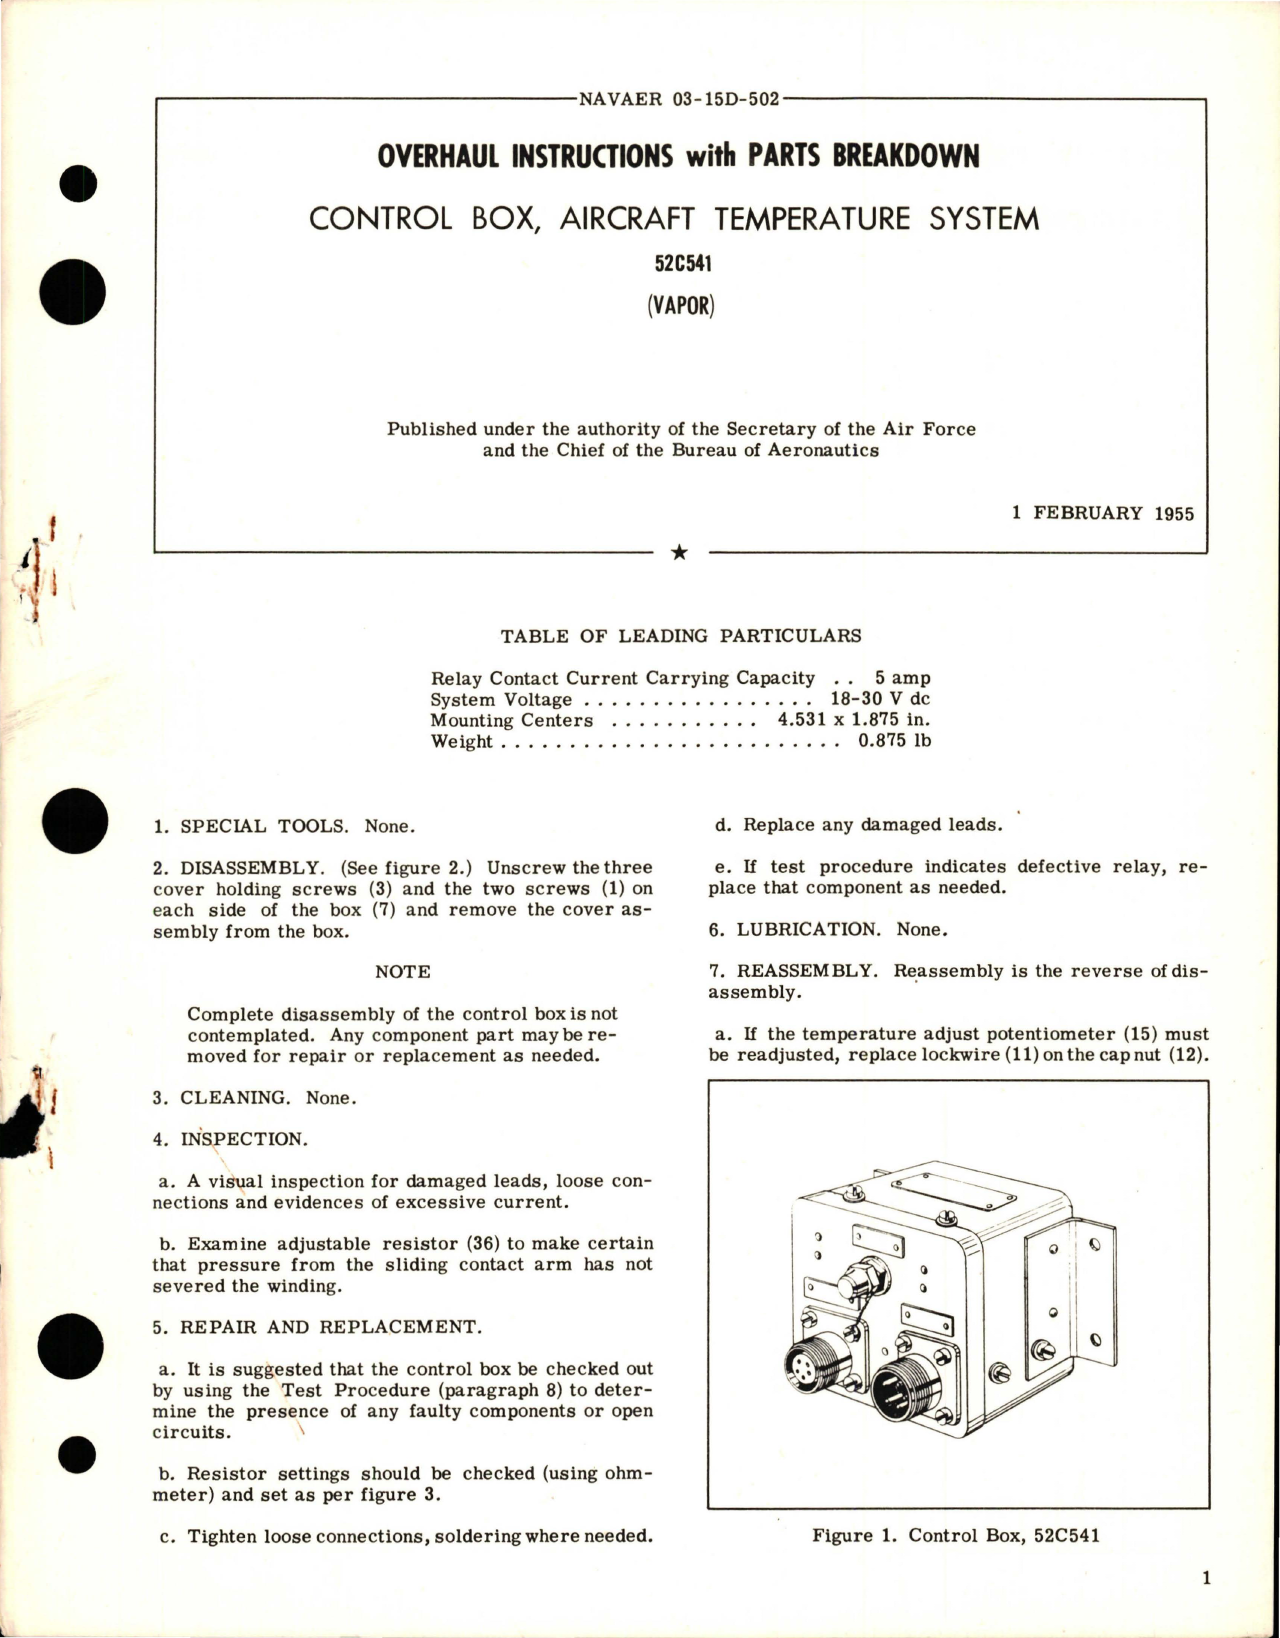 Sample page 1 from AirCorps Library document: Overhaul Instructions with Parts Breakdown for Temperature System Control Box - 52C541